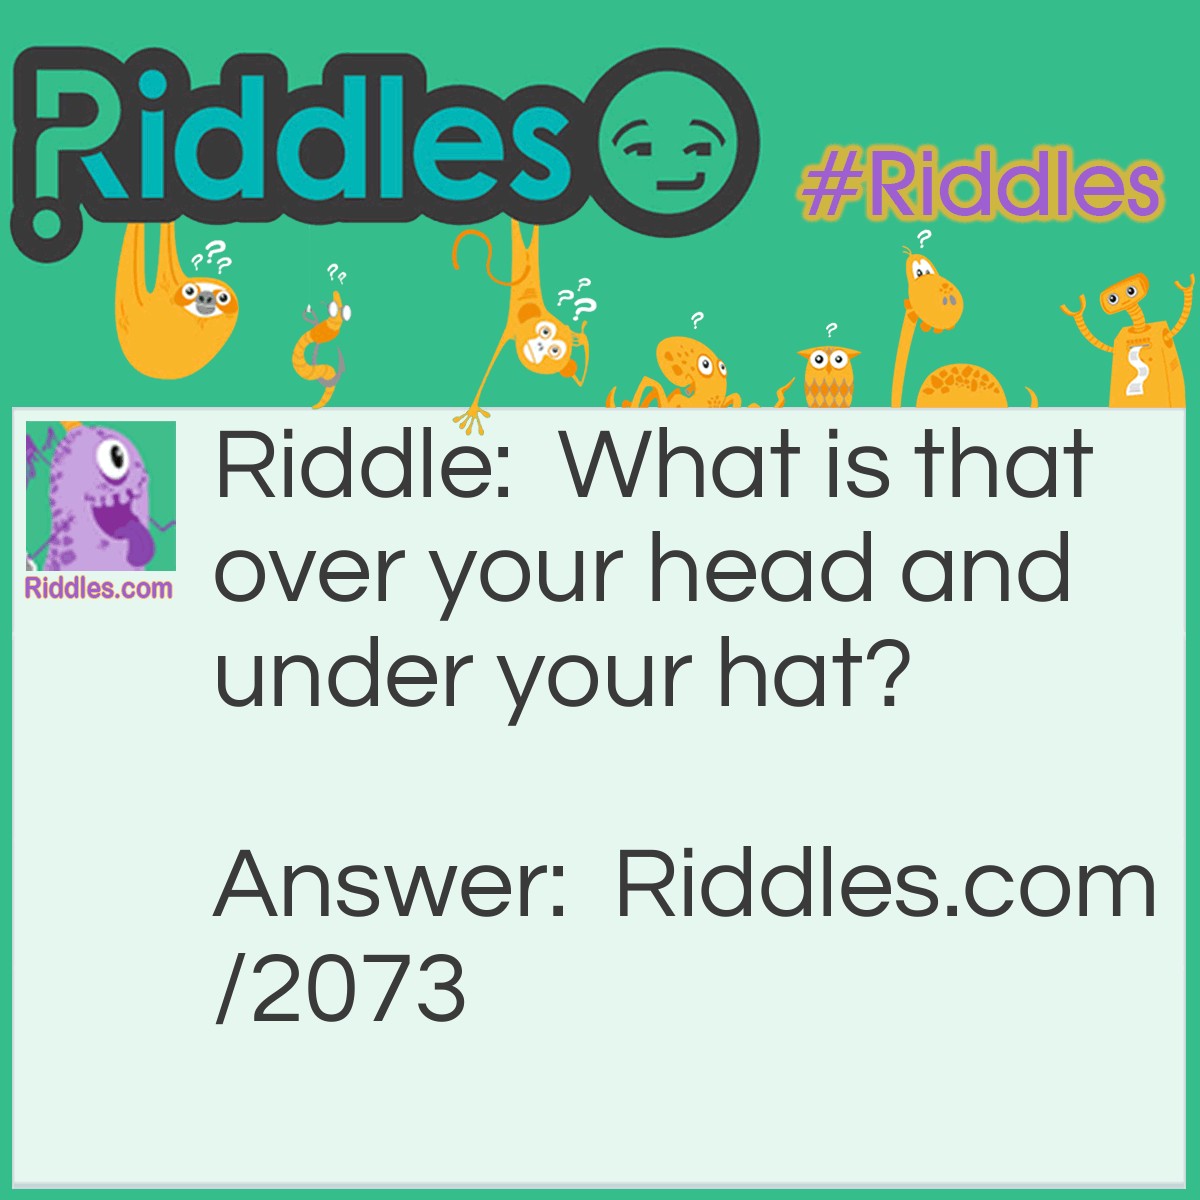 Riddle: What is that over your head and under your hat? Answer: Your hair.